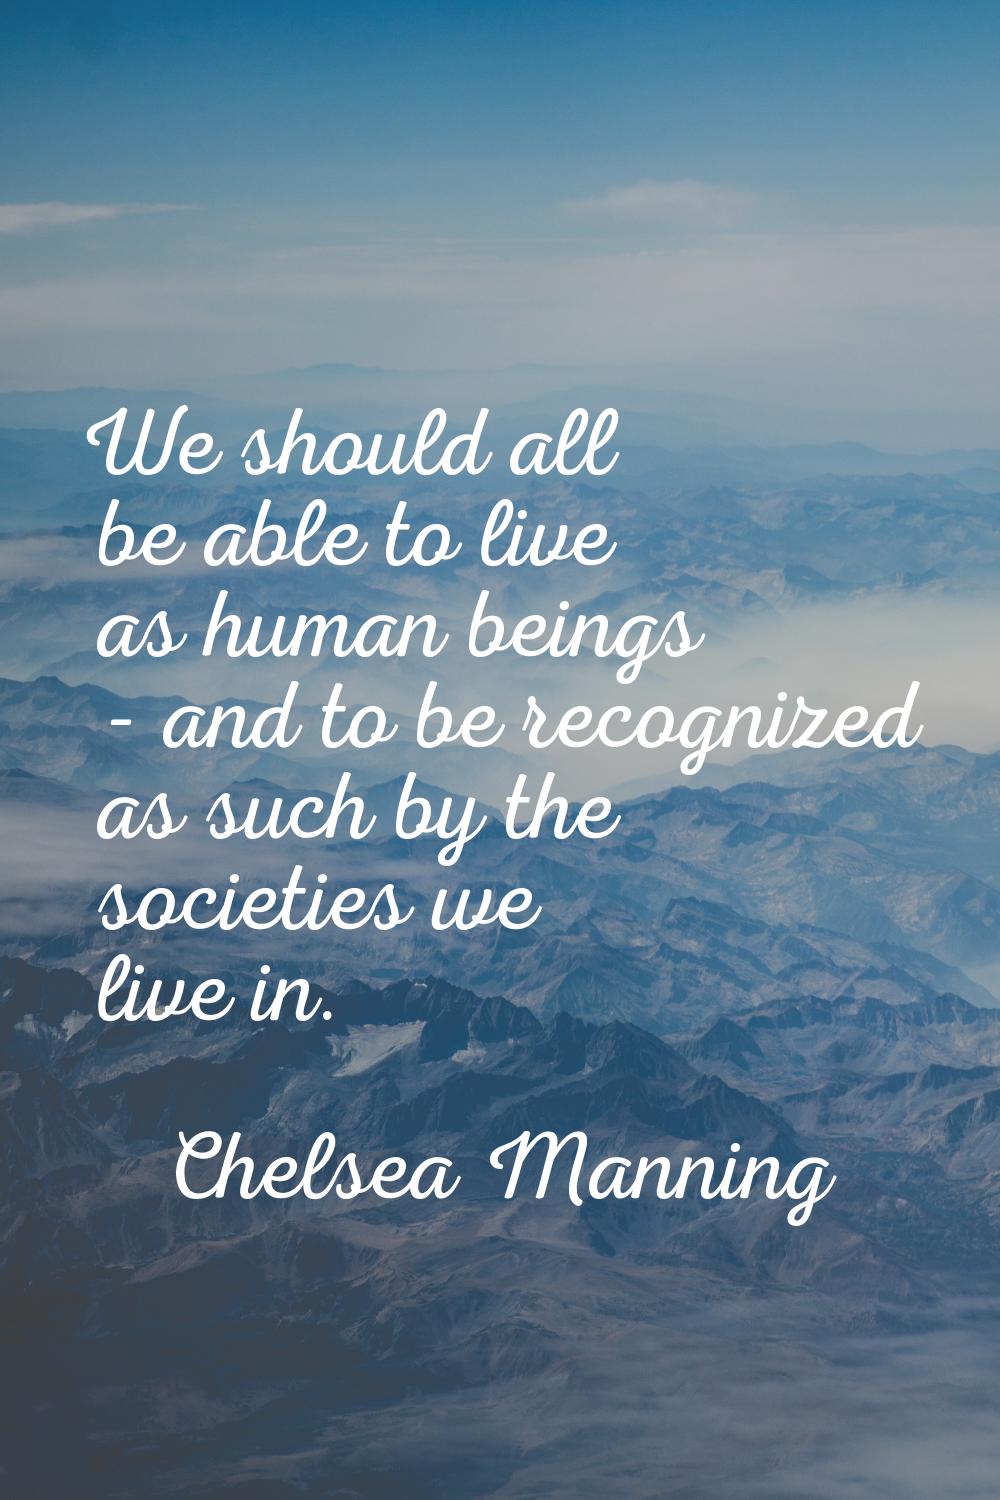 We should all be able to live as human beings - and to be recognized as such by the societies we li